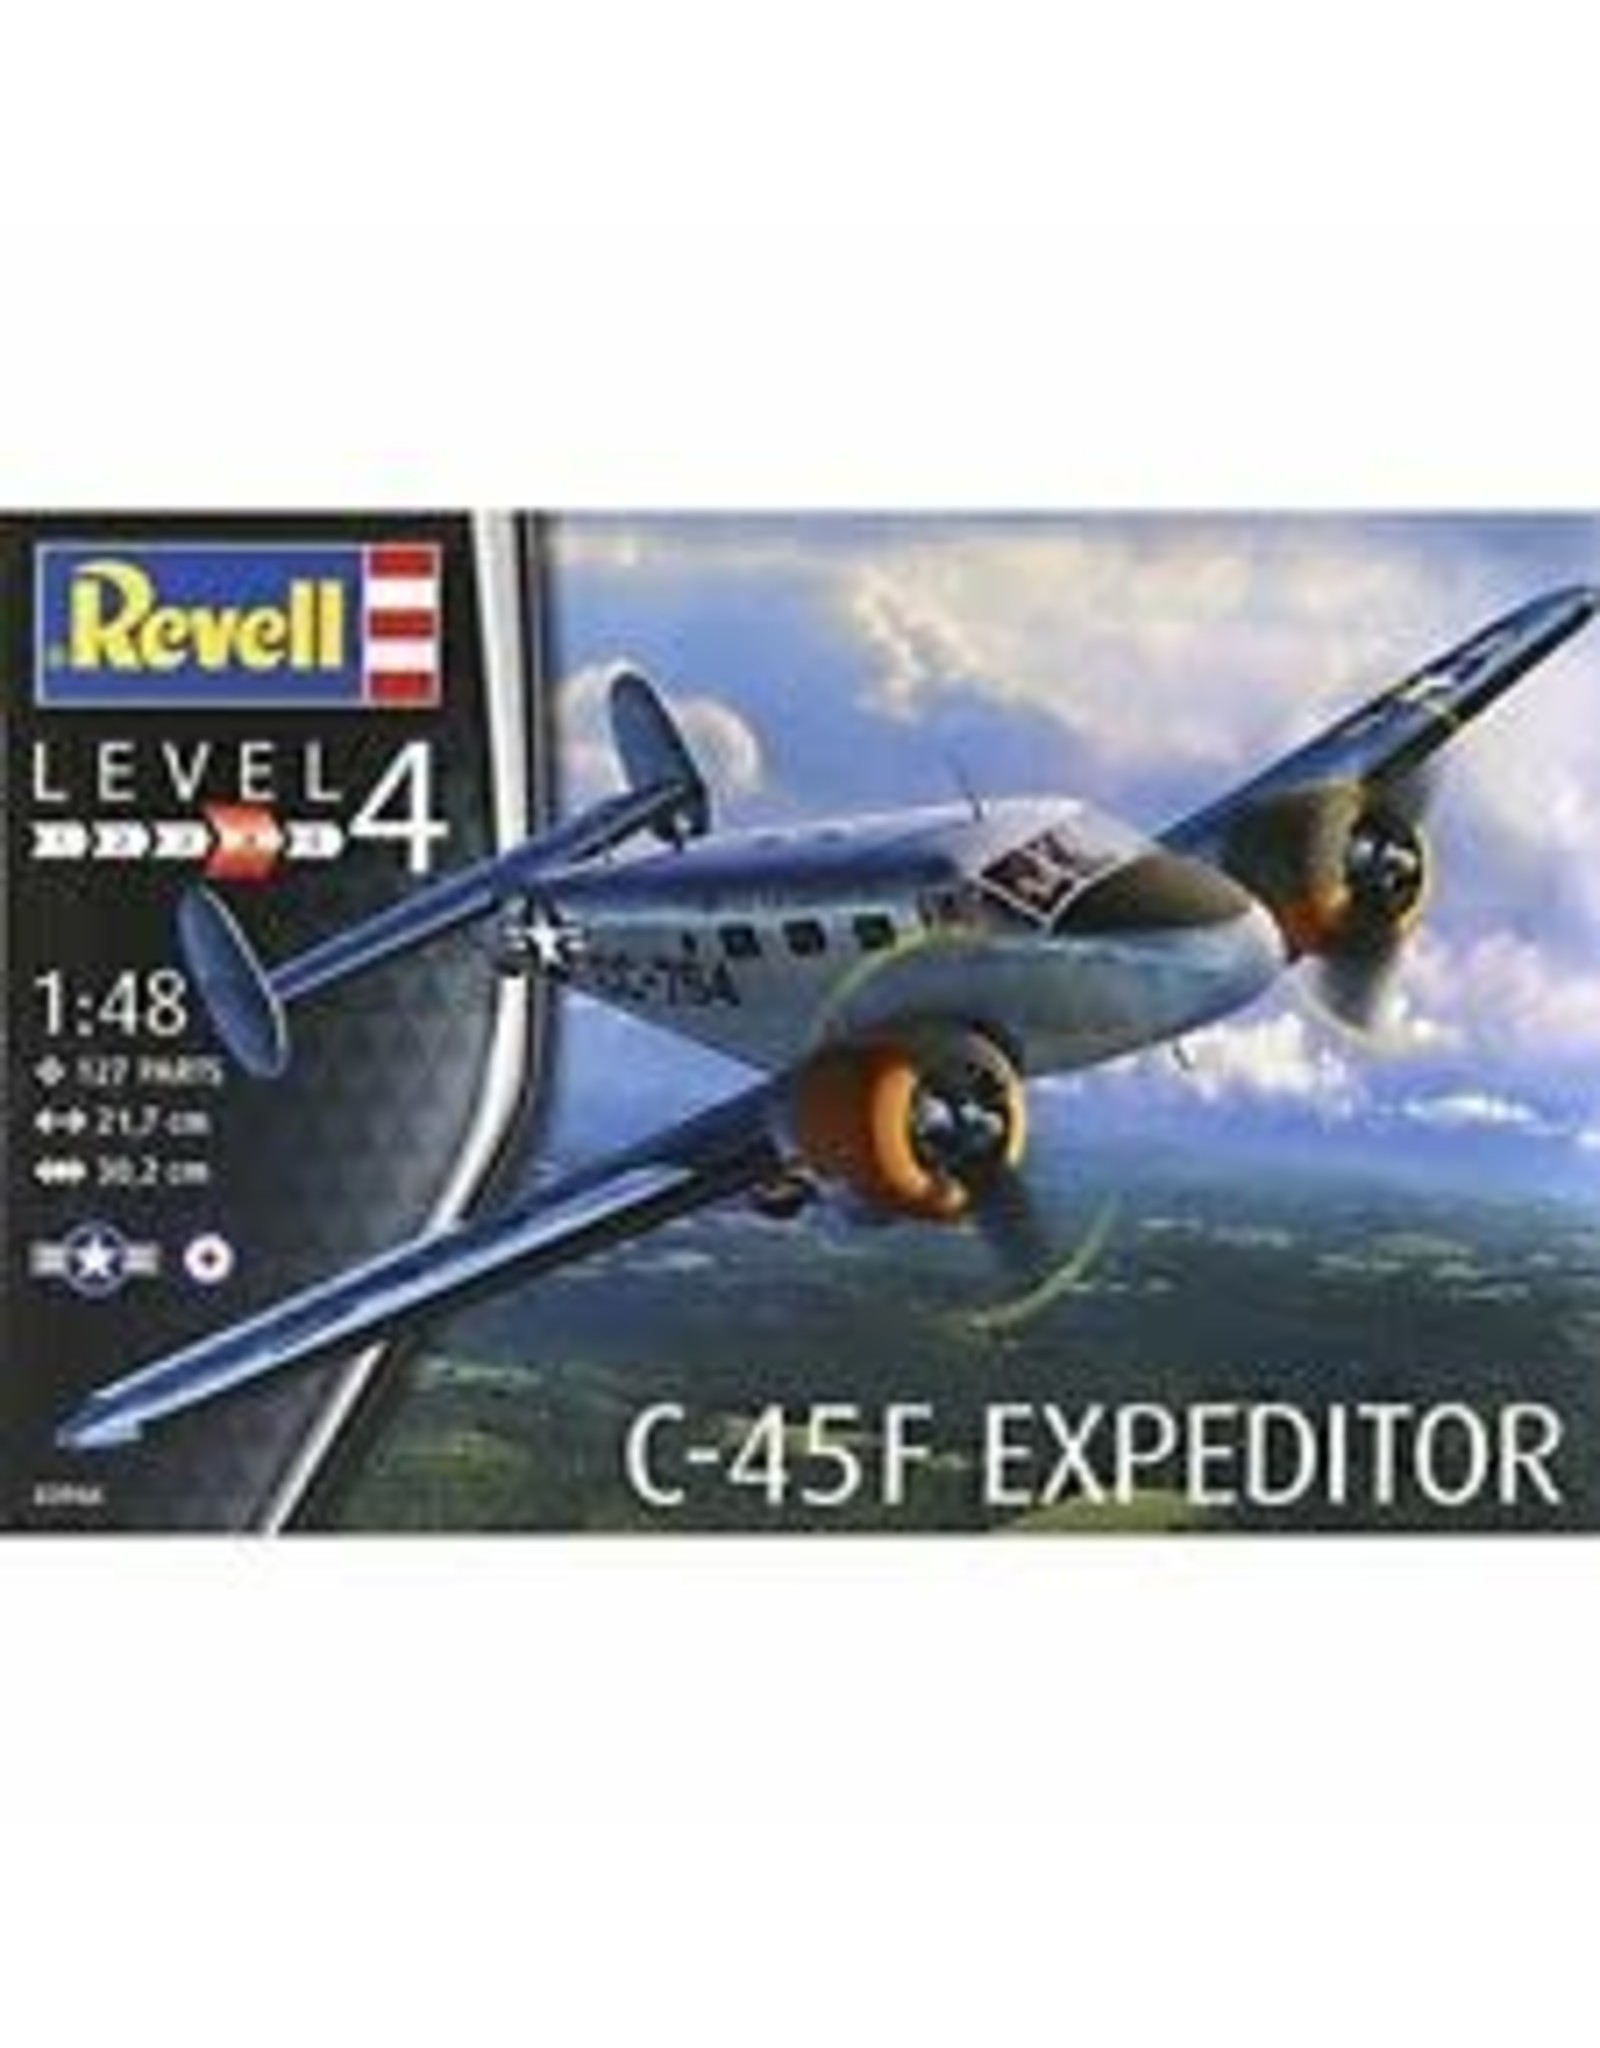 Revell C-45F Expeditor - 1/48